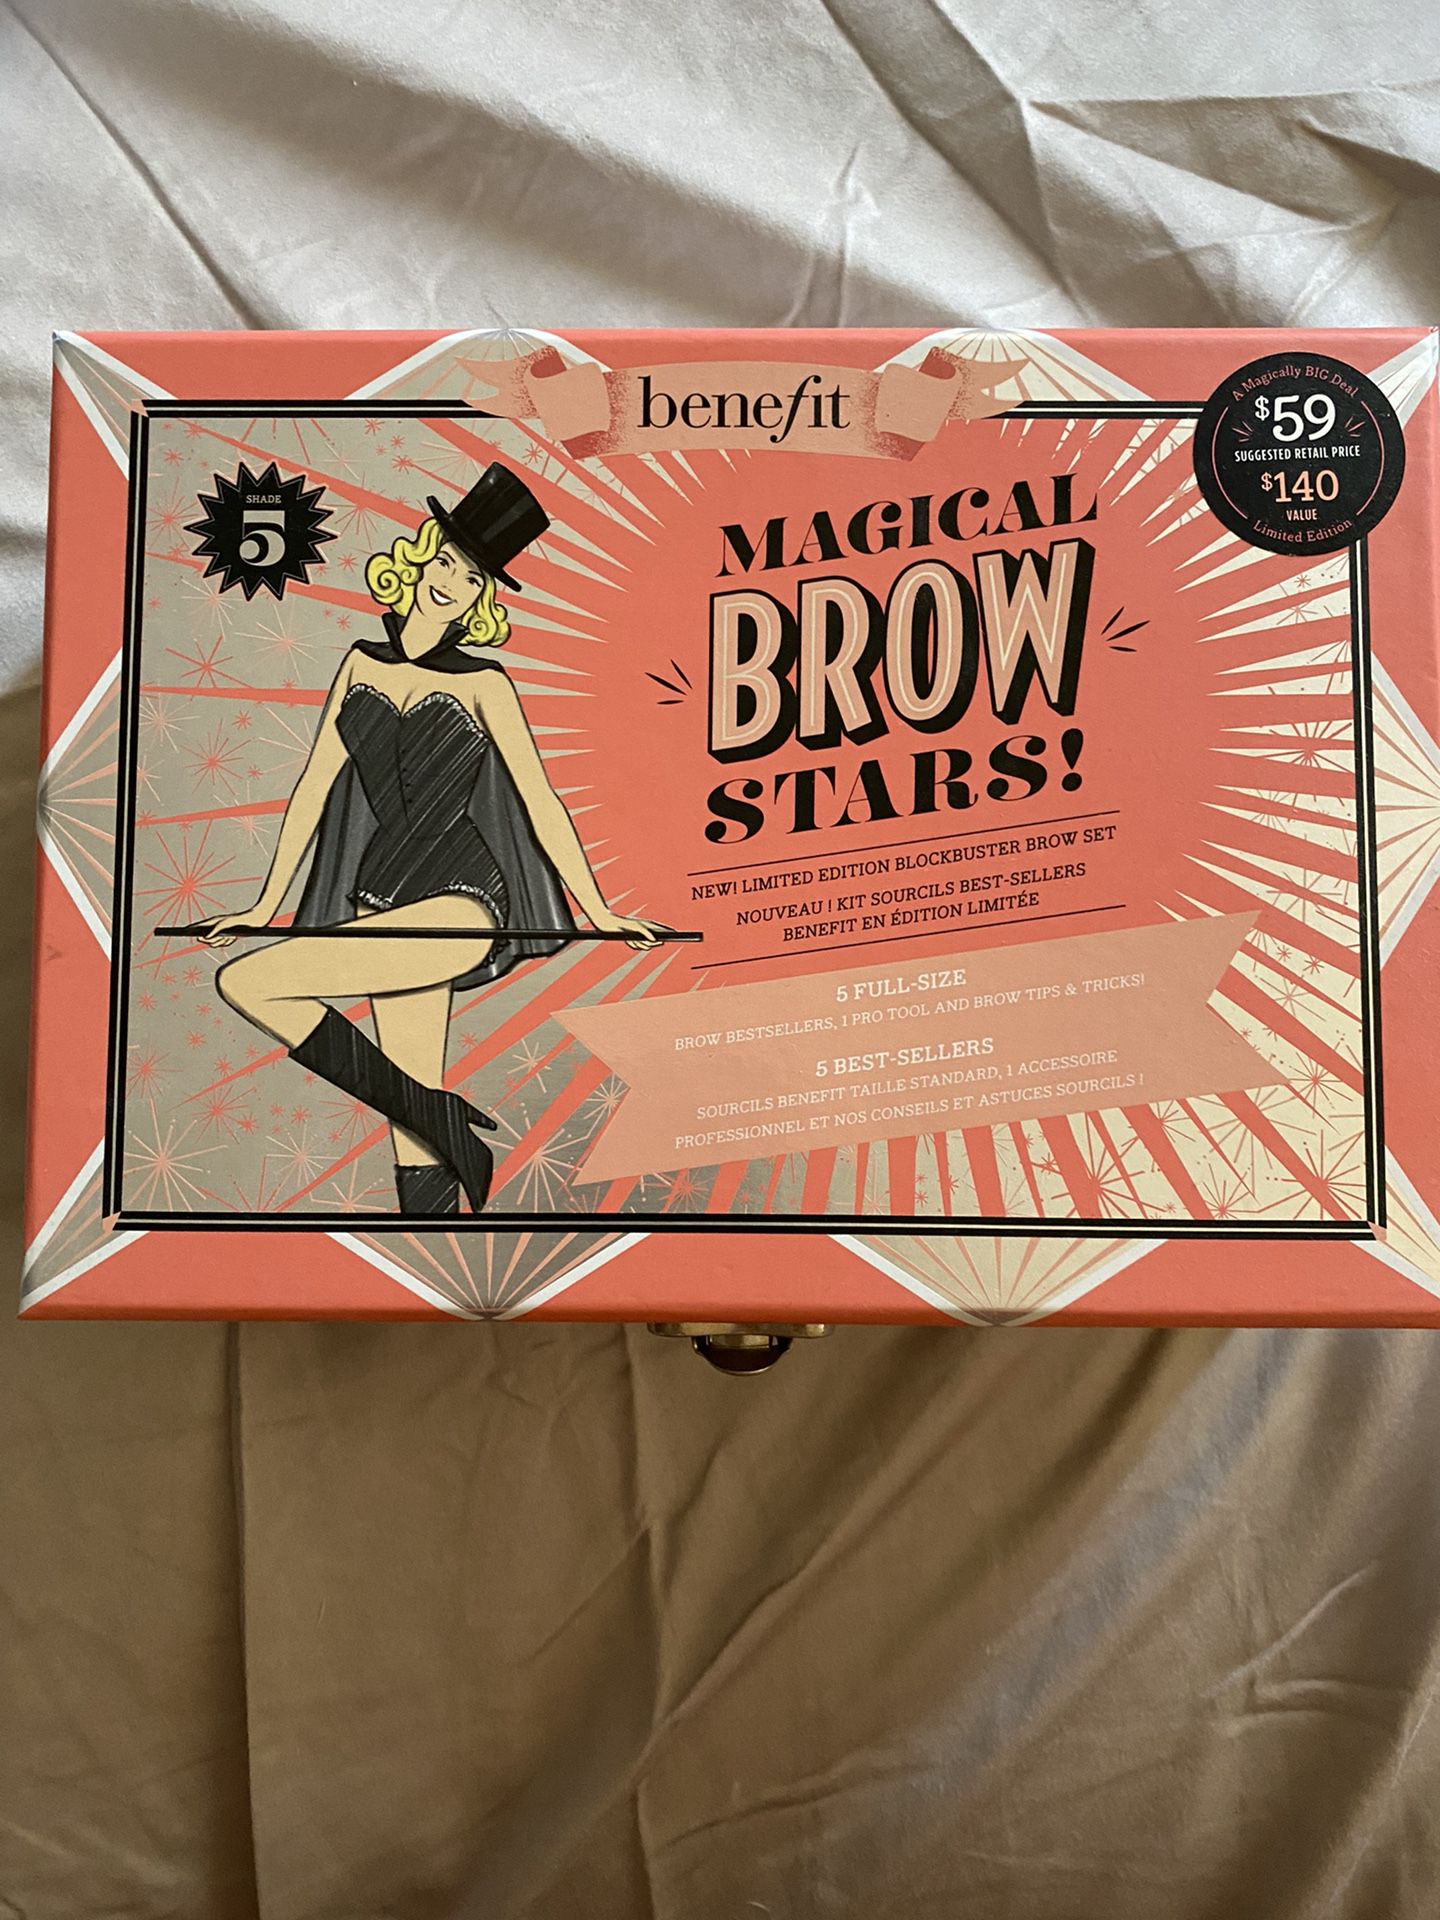 BENEFIT - Limited Edition 'Magical Brow Stars' Brow Set Shade 5 - Cool Black Brown